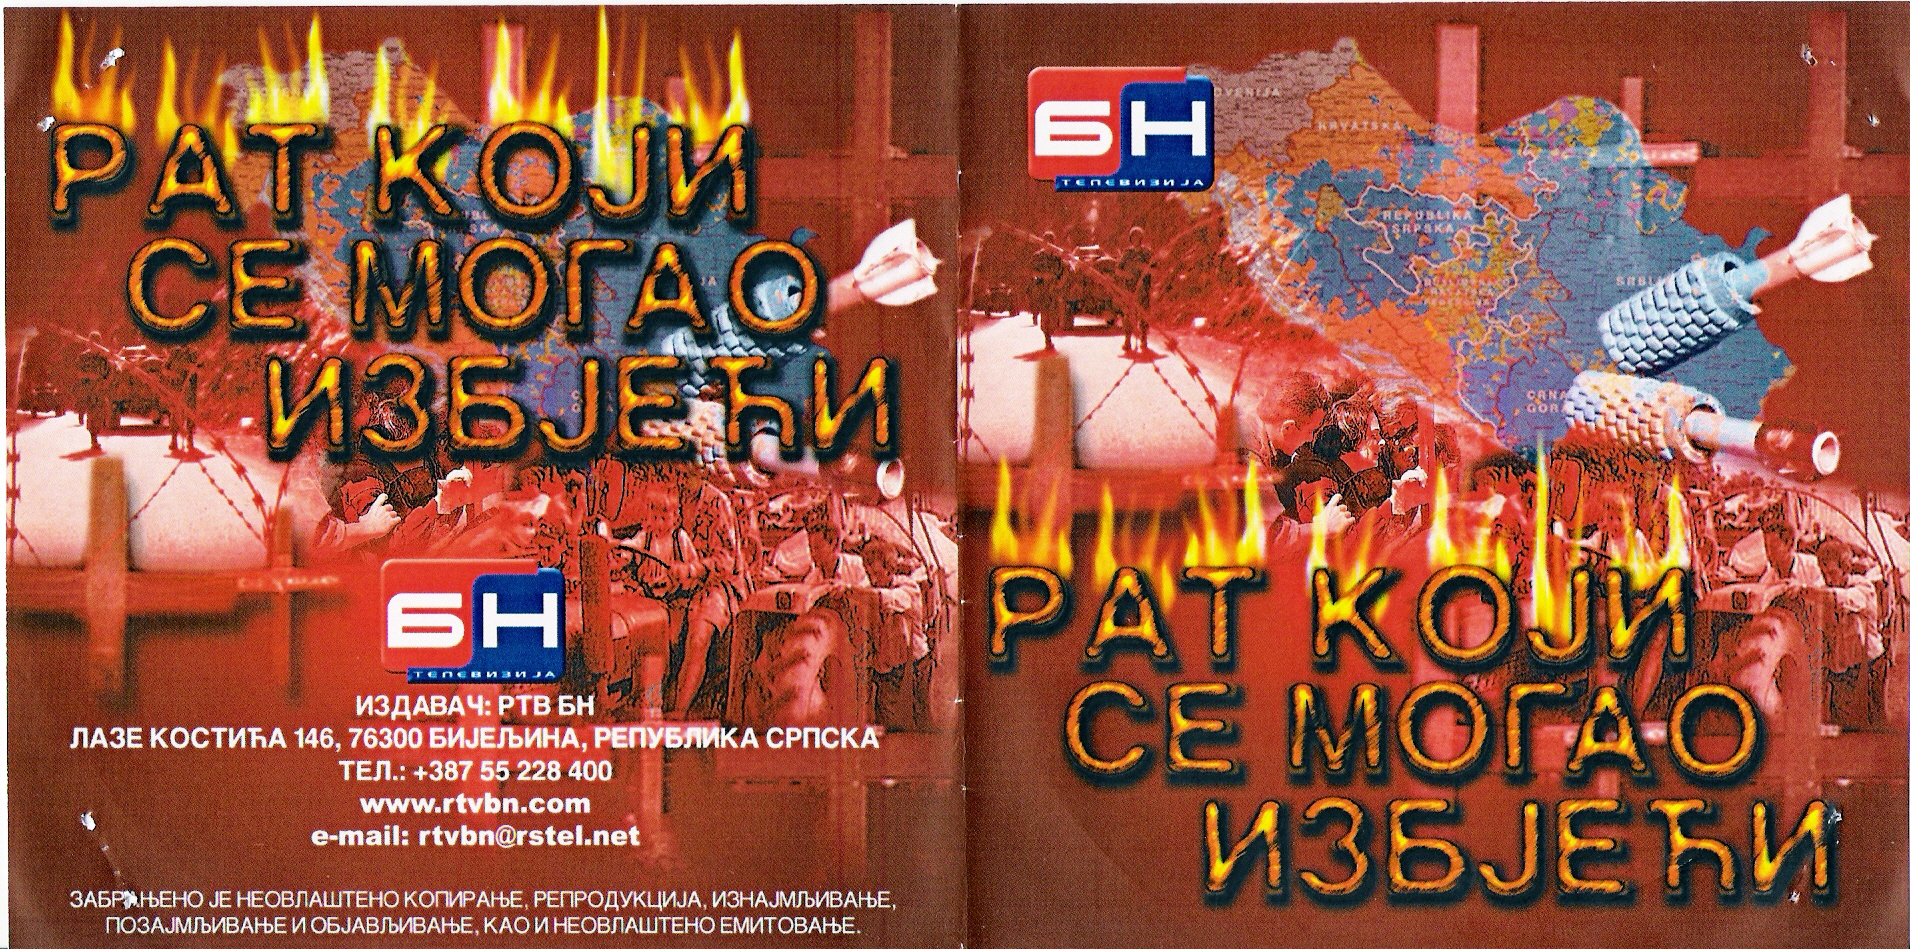 Click to view full size image -  DVD Cover - R - DVD - RAT KOJI SE MOGO IZBJEC - DVD - RAT KOJI SE MOGO IZBJEC.jpg